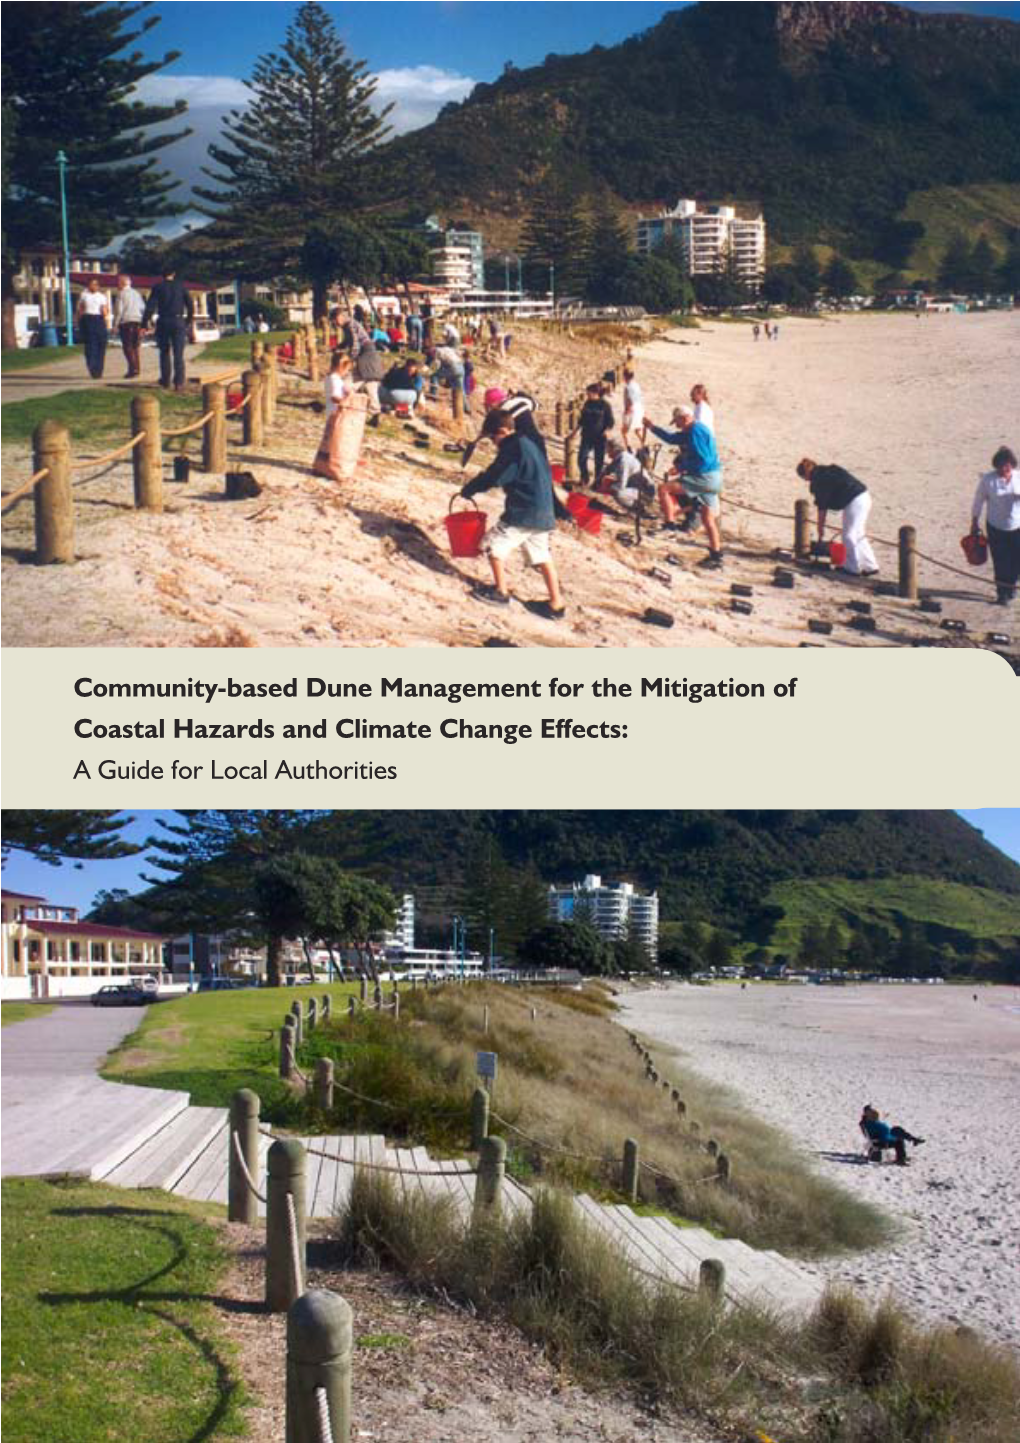 Community-Based Dune Management for the Mitigation of Coastal Hazards and Climate Change Effects: a Guide for Local Authorities